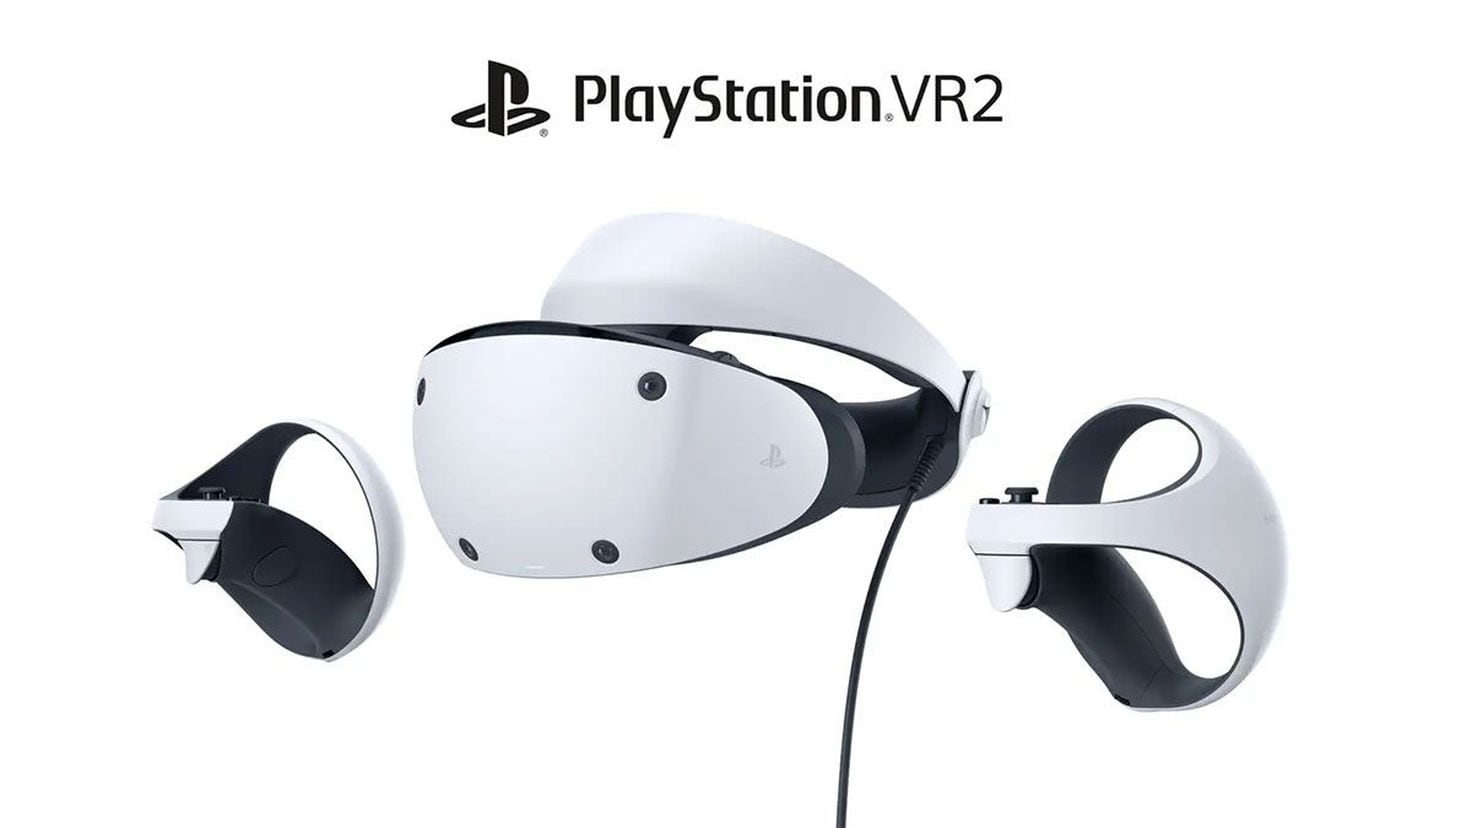 PS VR2 is unveiled in images: this is what Sony's virtual reality